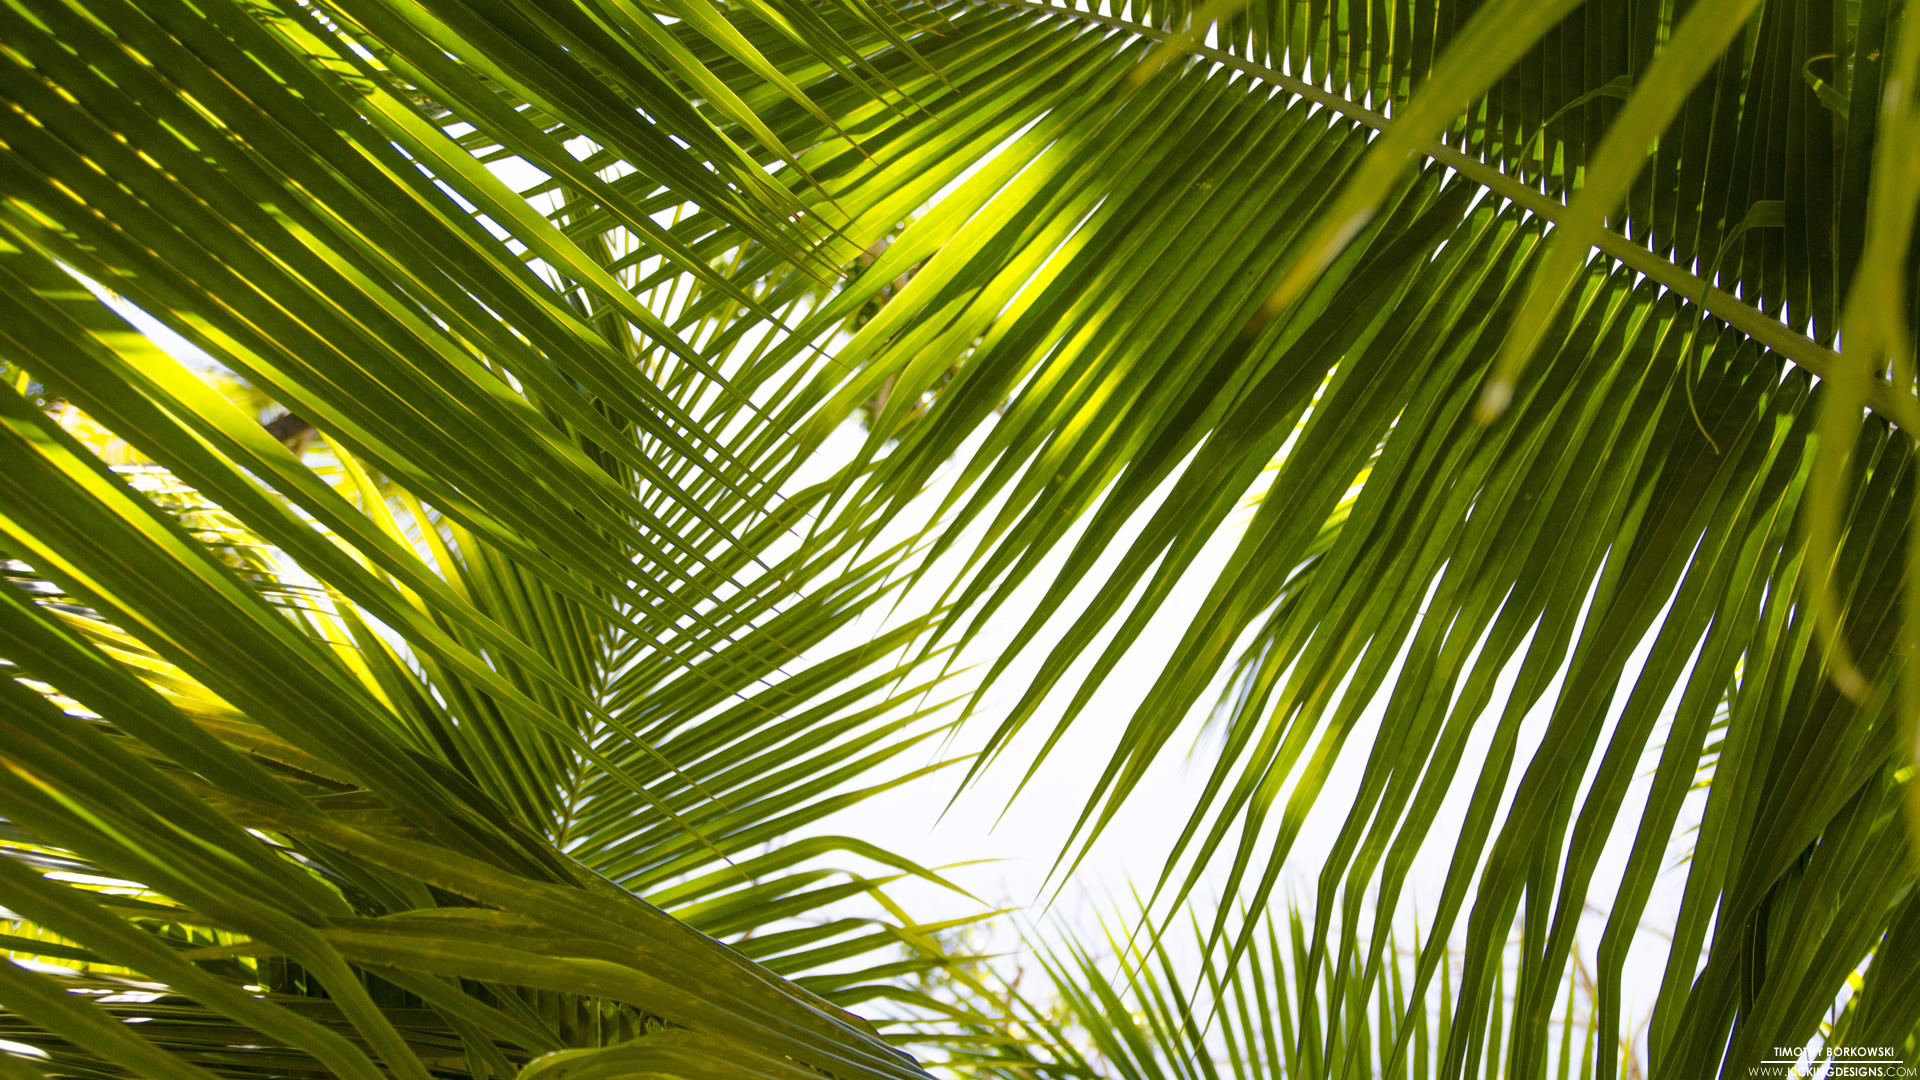 1920x1080 Tropical Leaves 9-17-2015 Wallpaper Background | Kicking Designs